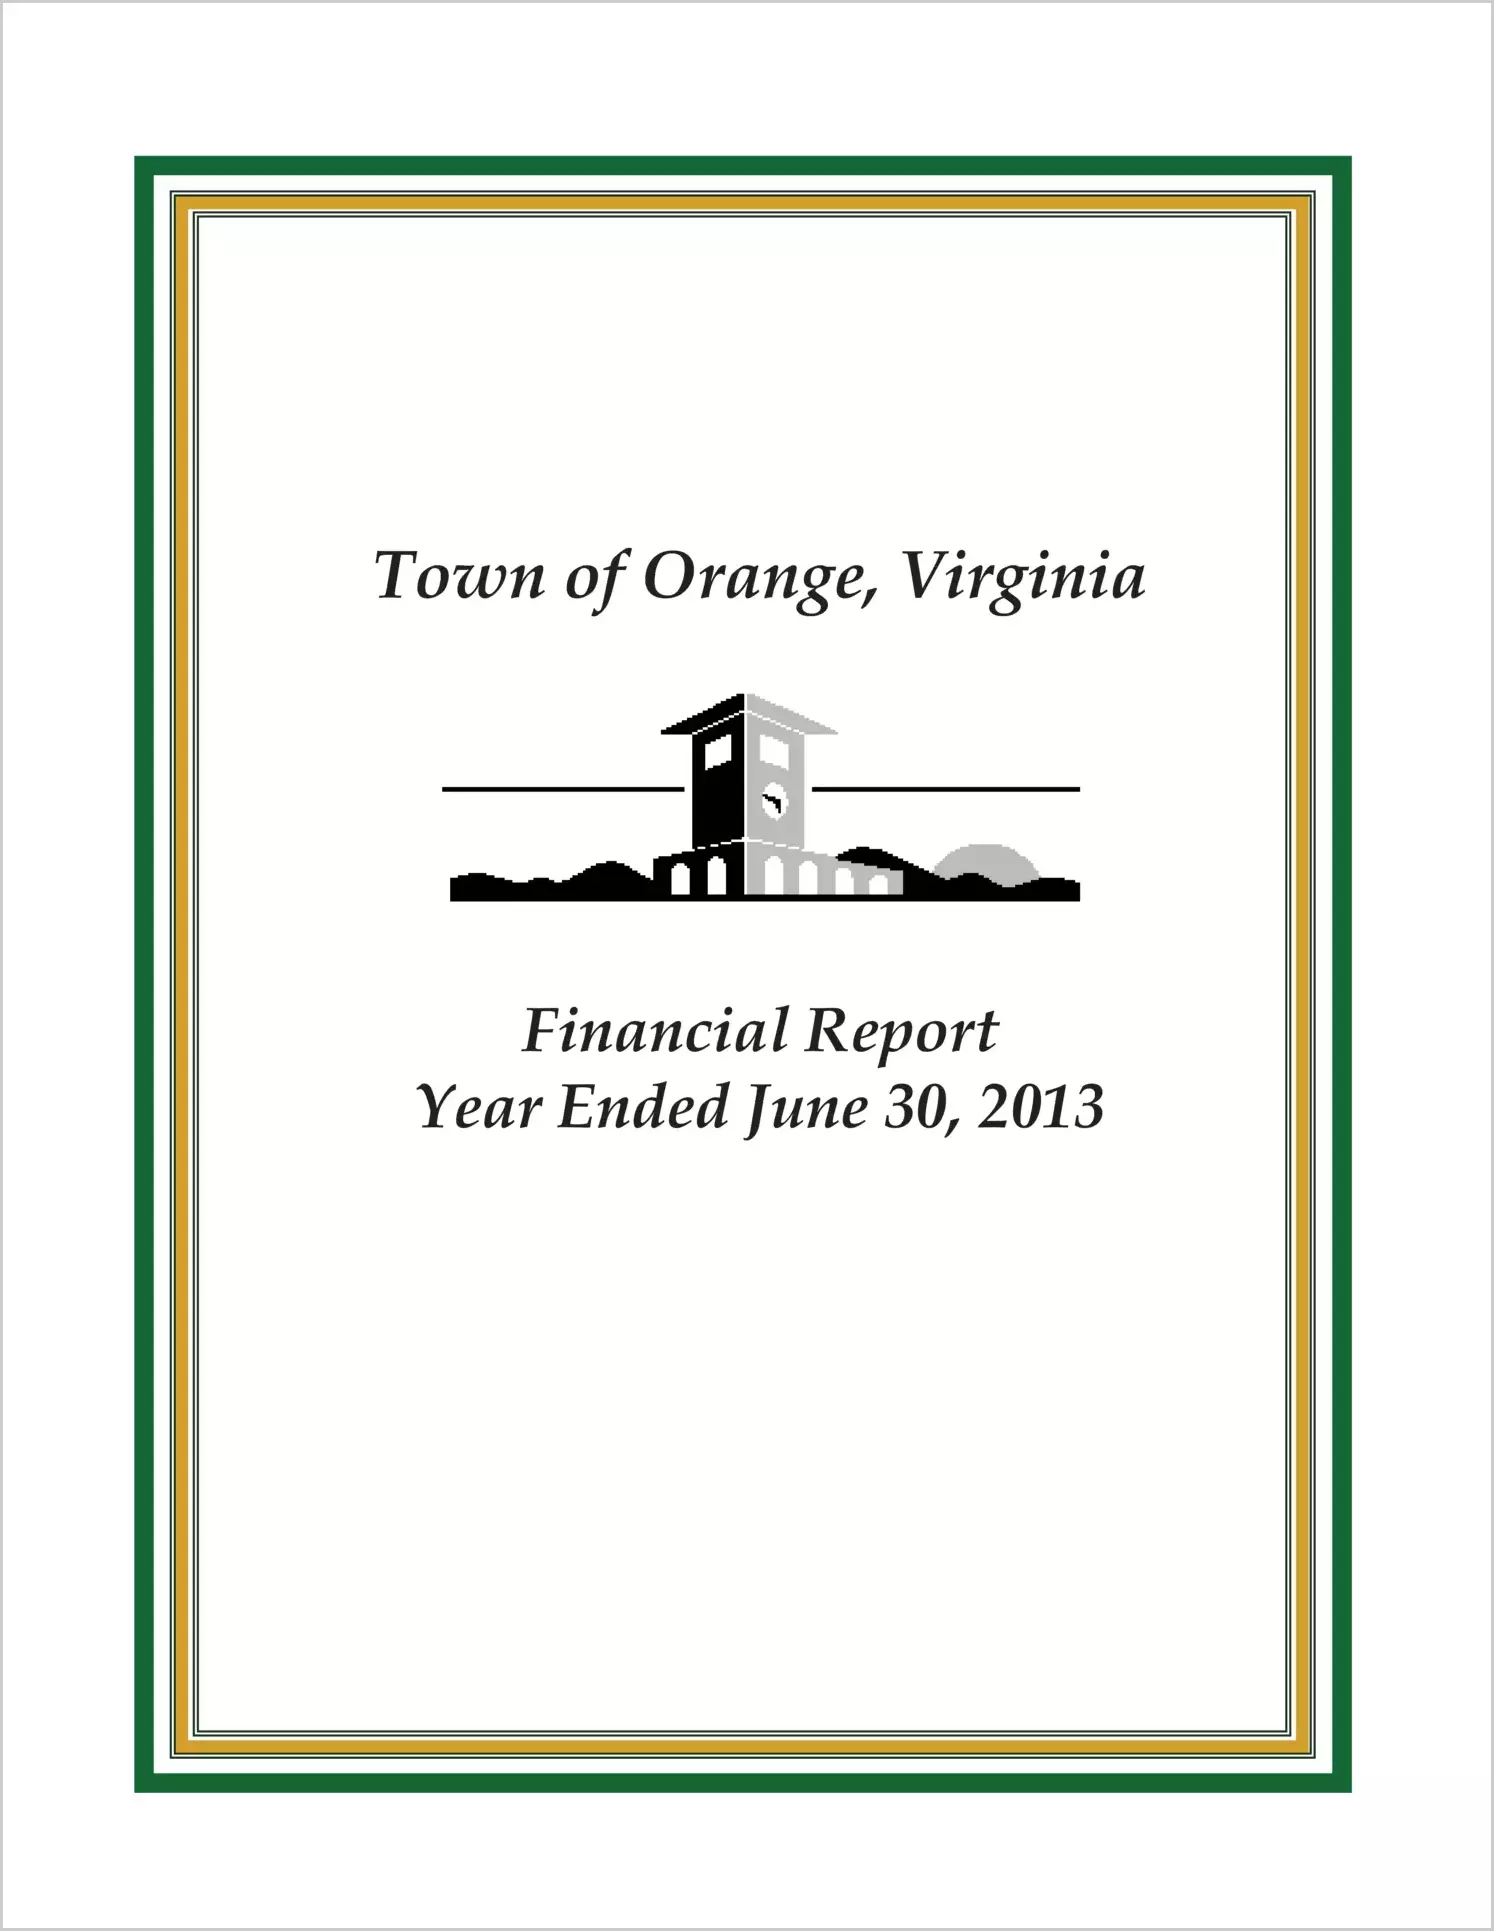 2013 Annual Financial Report for Town of Orange